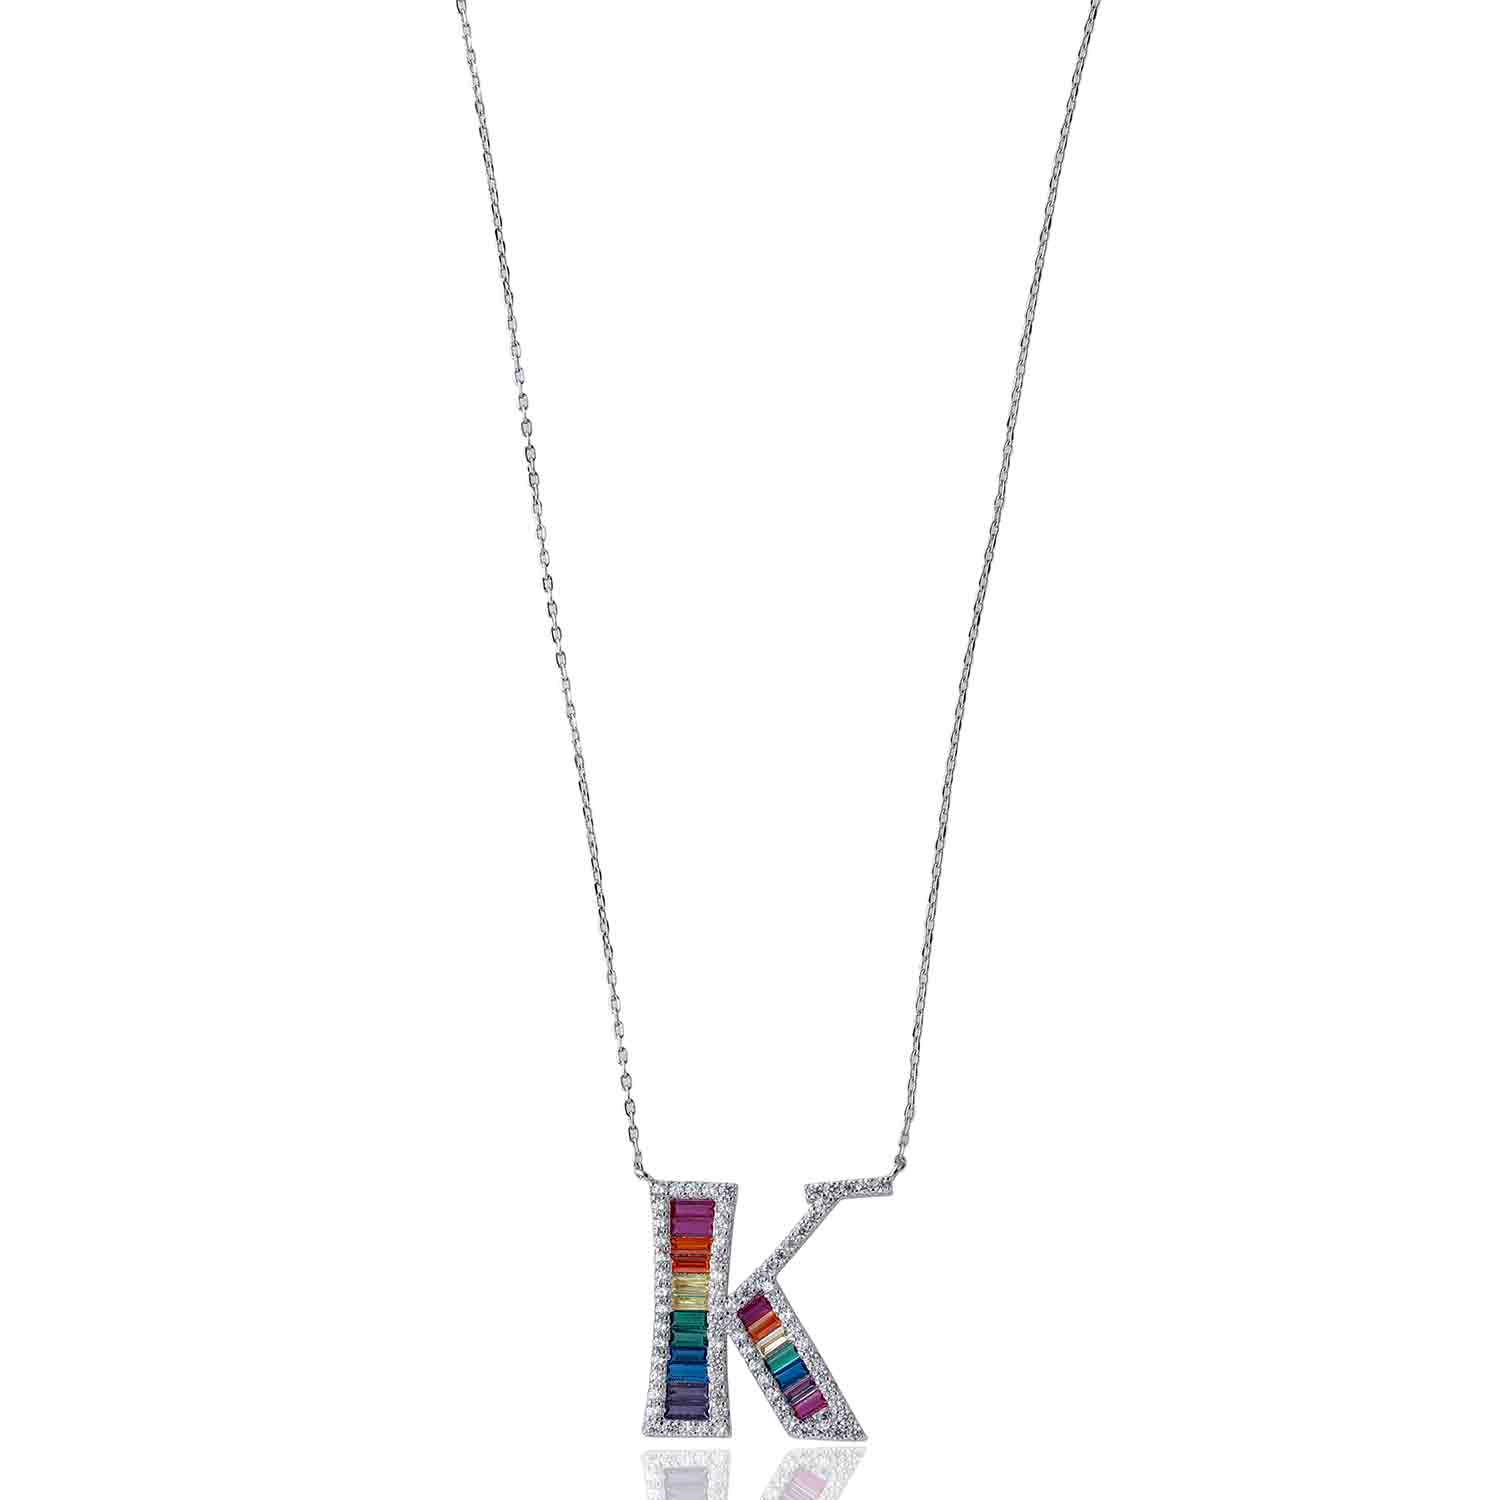 Alphabet K 925 Silver Pendant With Chain ~ CaratCafe – CaratCafeInd